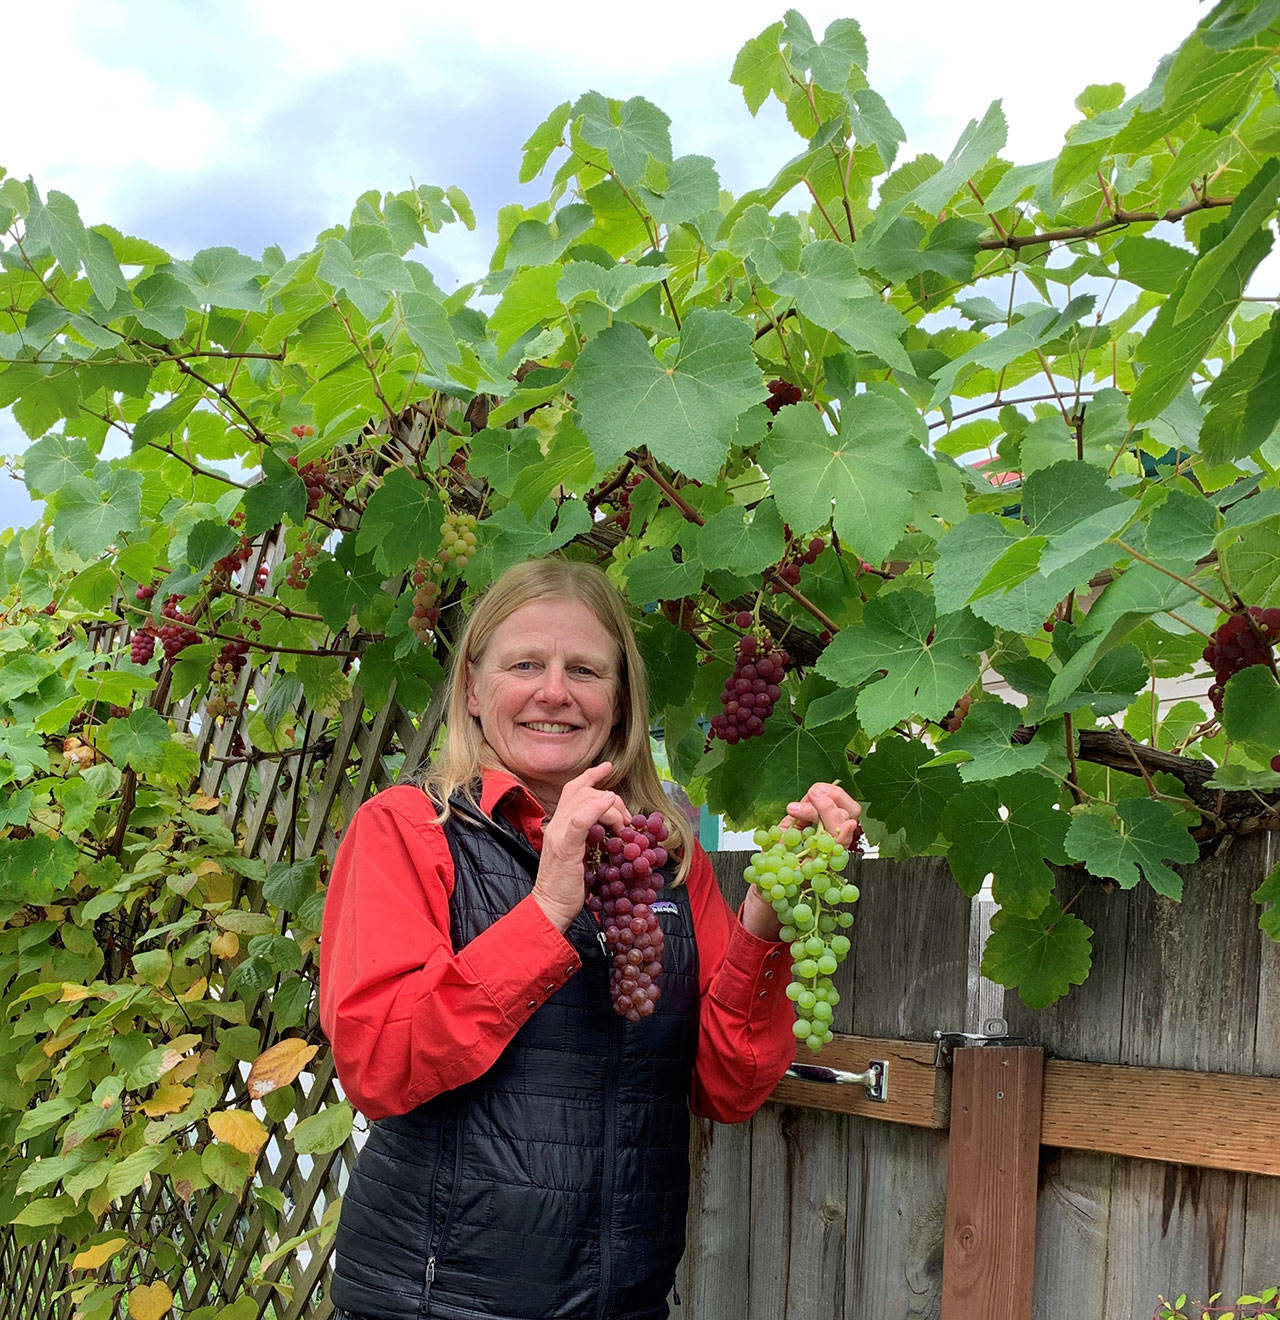 Selinda Barkhuis displays Himrod and Einset grapes grown on her city lot in central Port Angeles. Photo by Betty Harriman